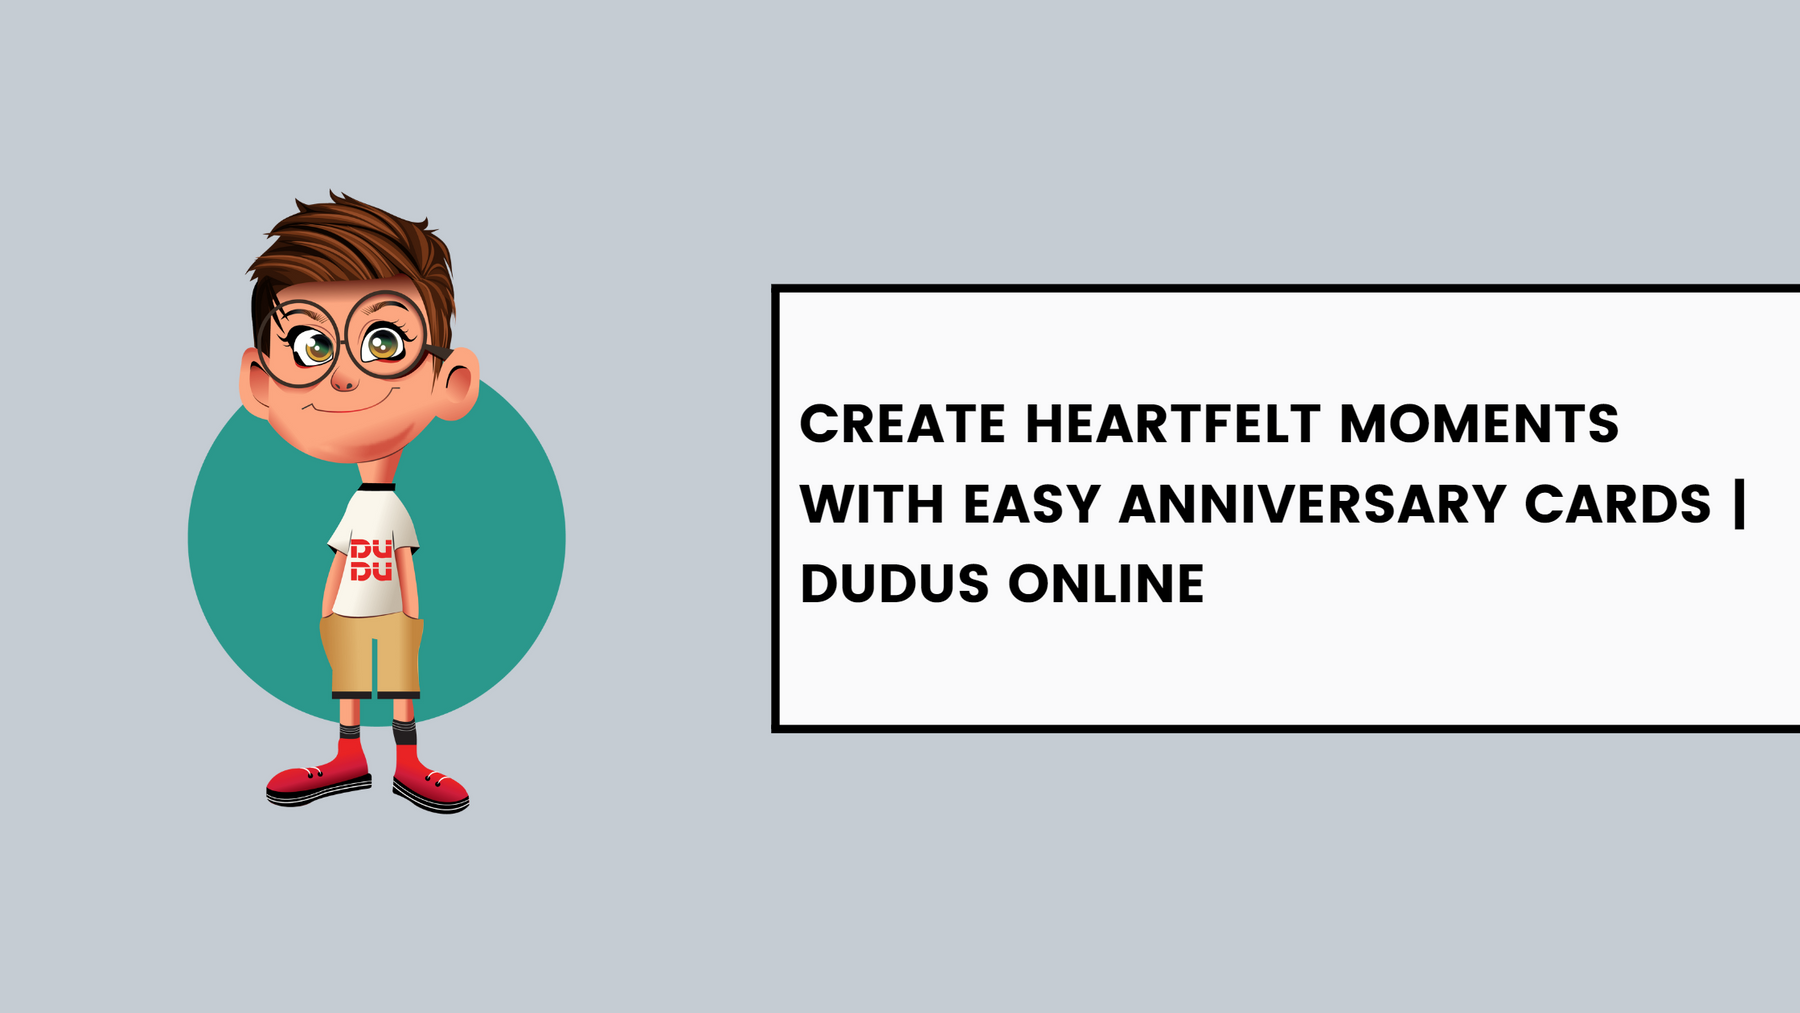 Create Heartfelt Moments with Easy Anniversary Cards | Dudus Online